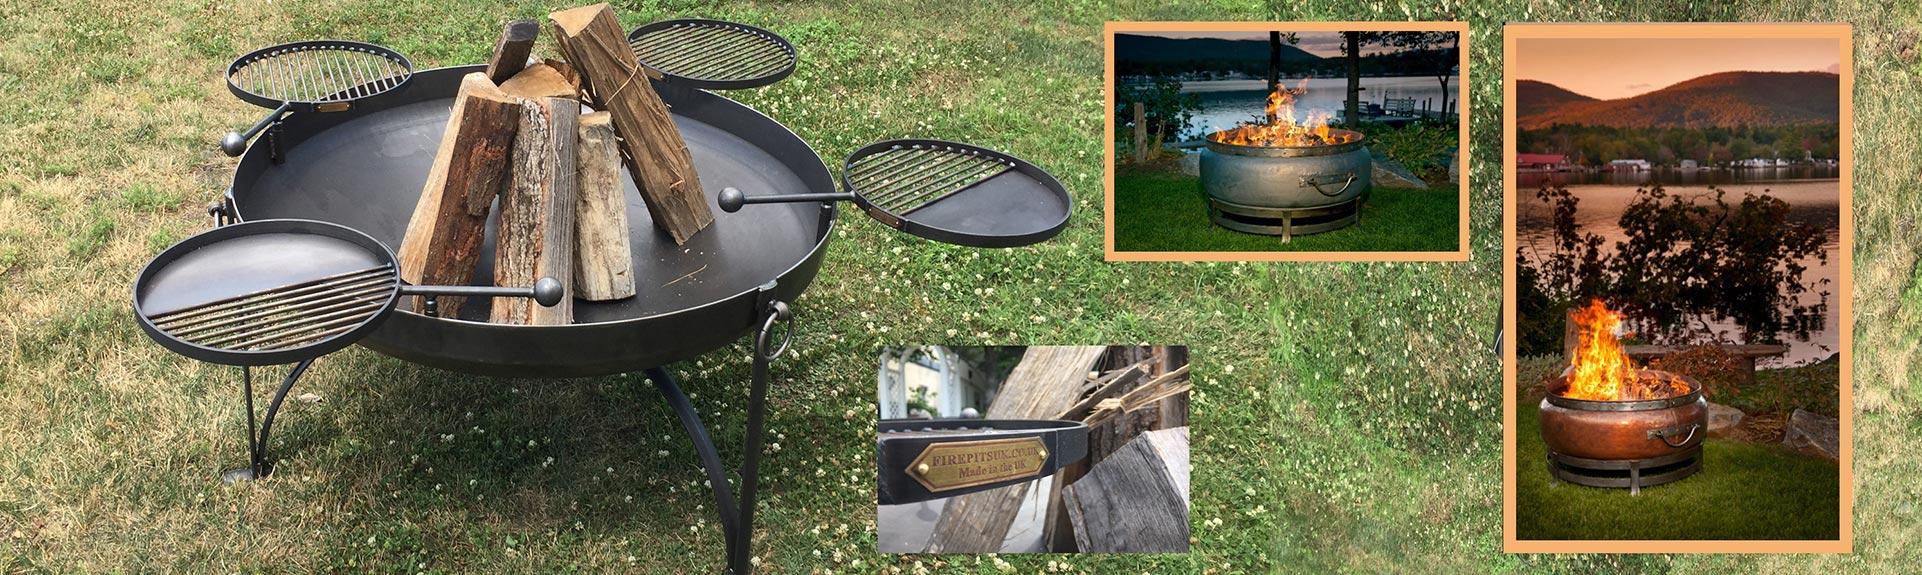 fire pit cooking Monmouth County nj Wood Stove Fireplace Center